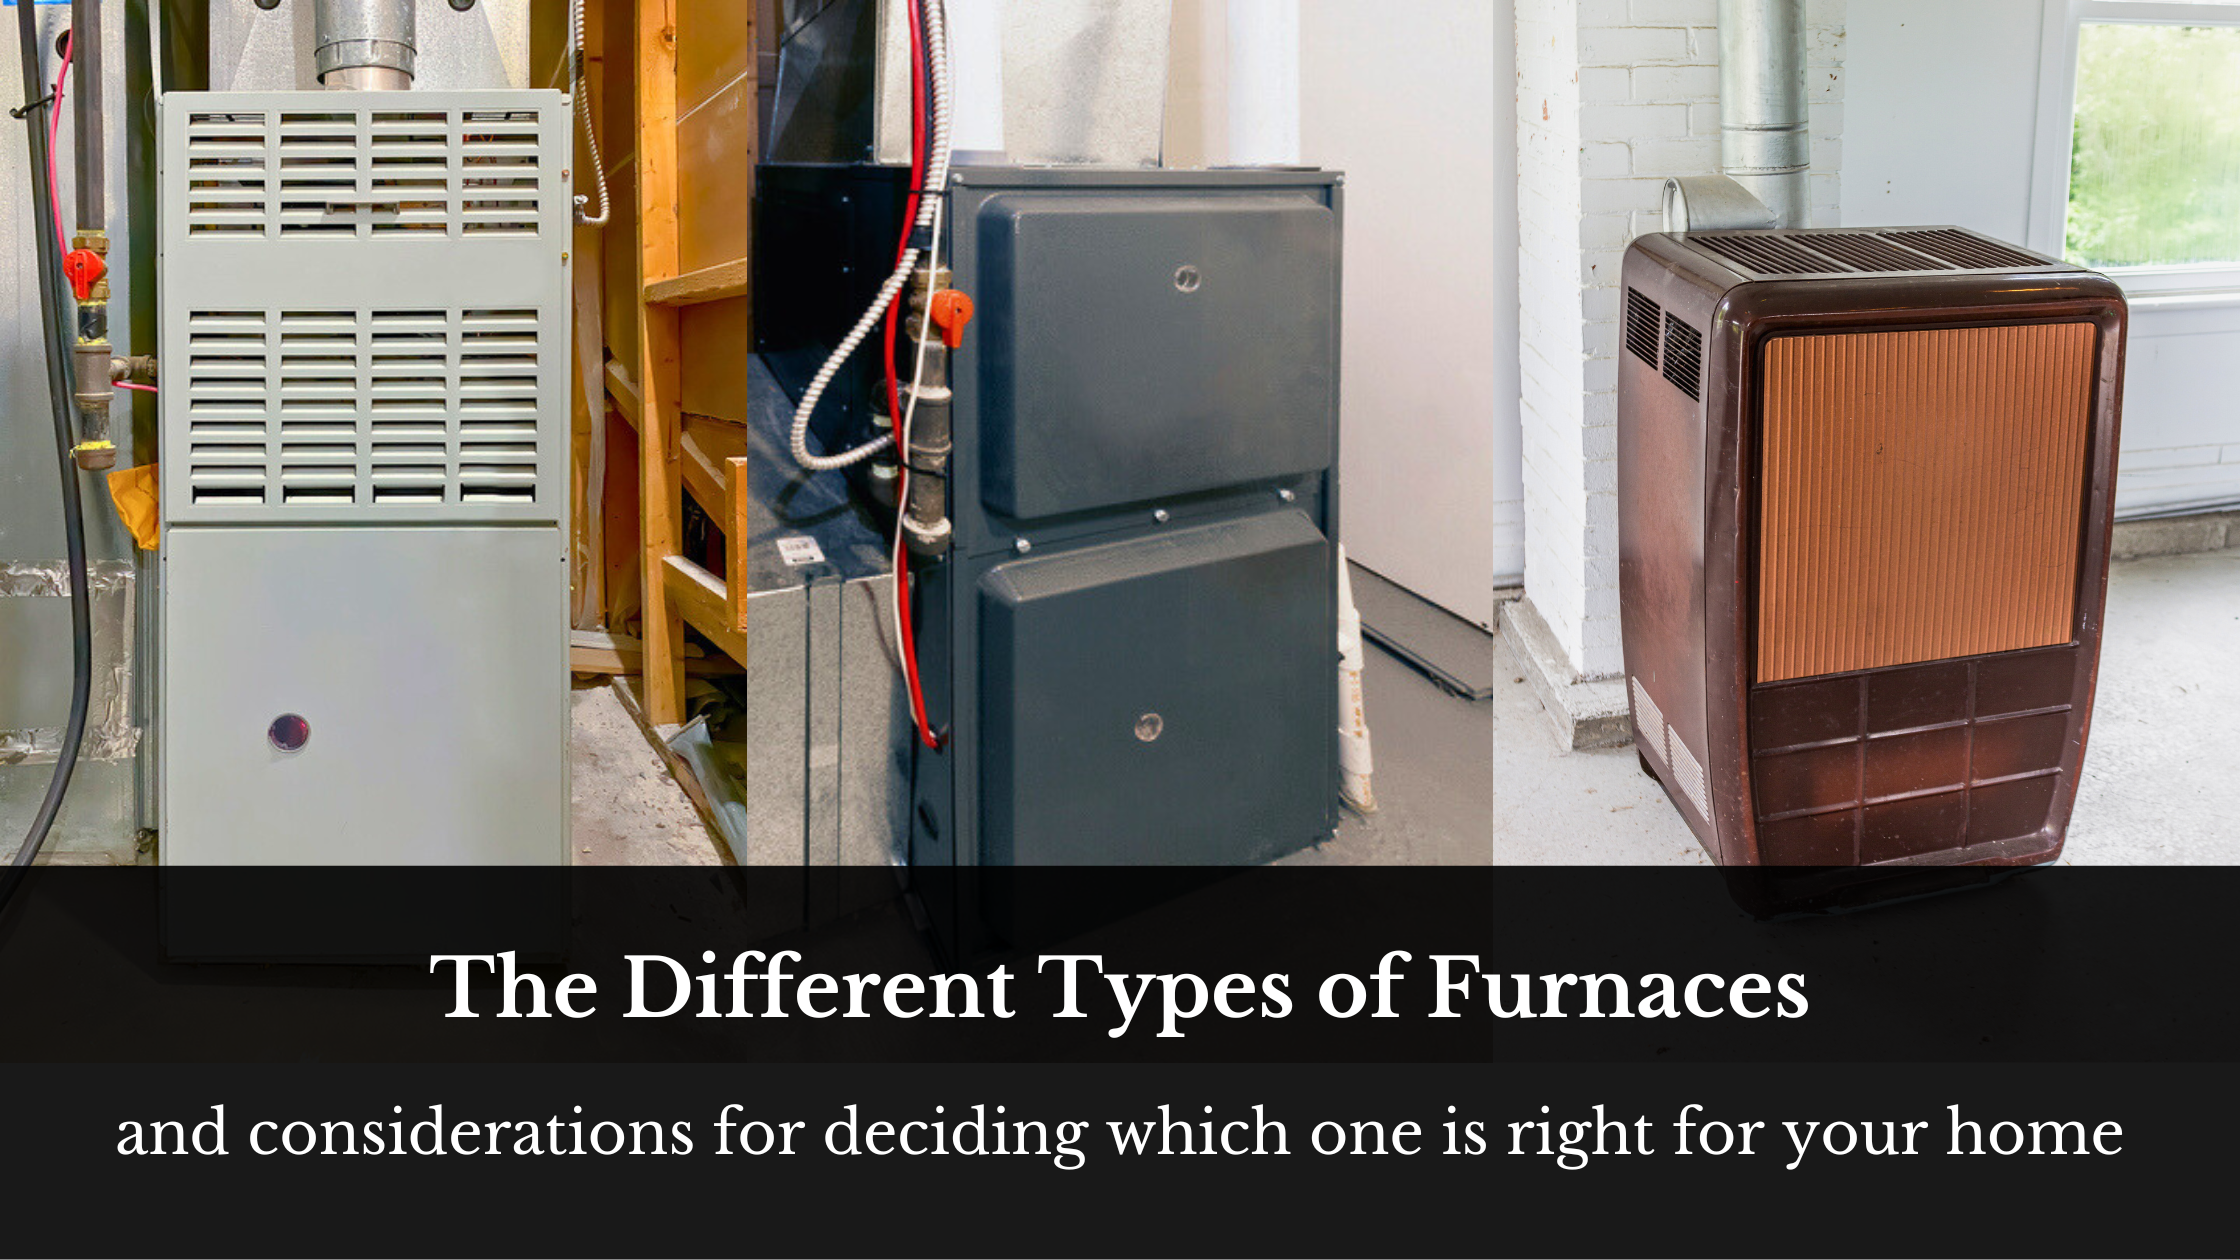 The Different Types of Furnaces - Learn the Pros and Cons of Gas vs Oil vs Electric, and how to decide which furnace is right for your home.